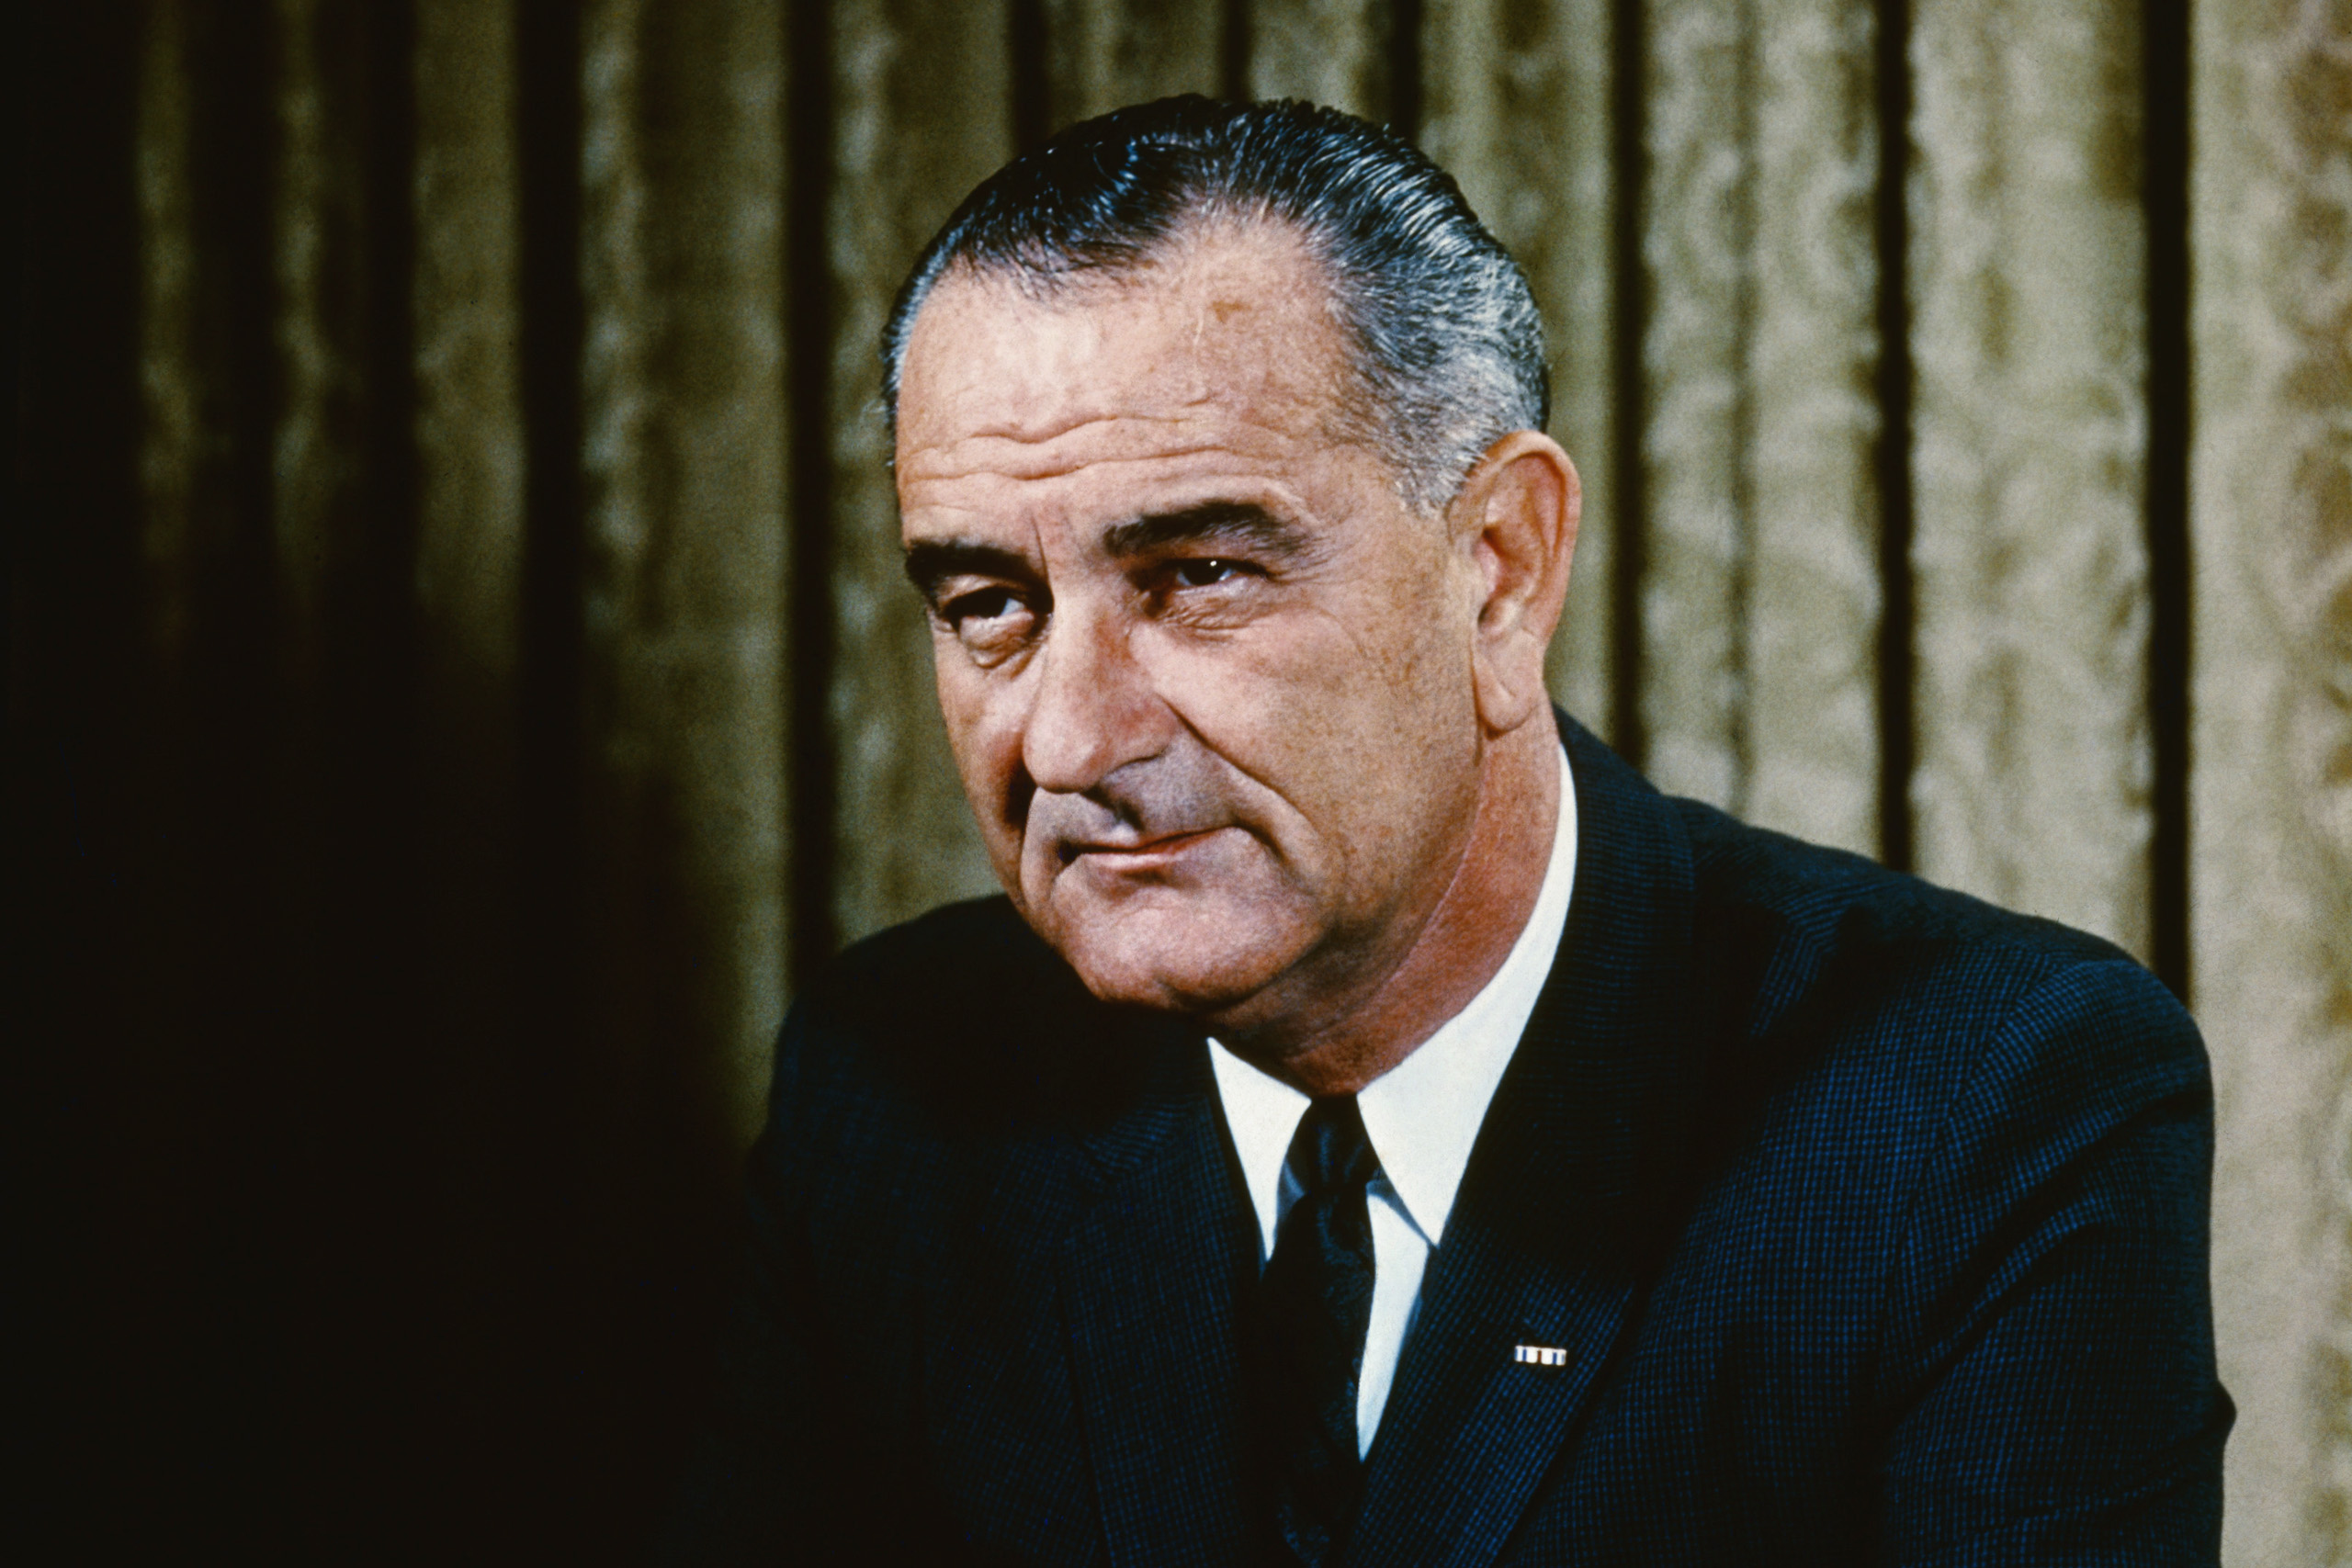 Image: Newly released JFK files reveal Democrat President Lyndon Johnson was a member of the KKK, which was run by Democrats